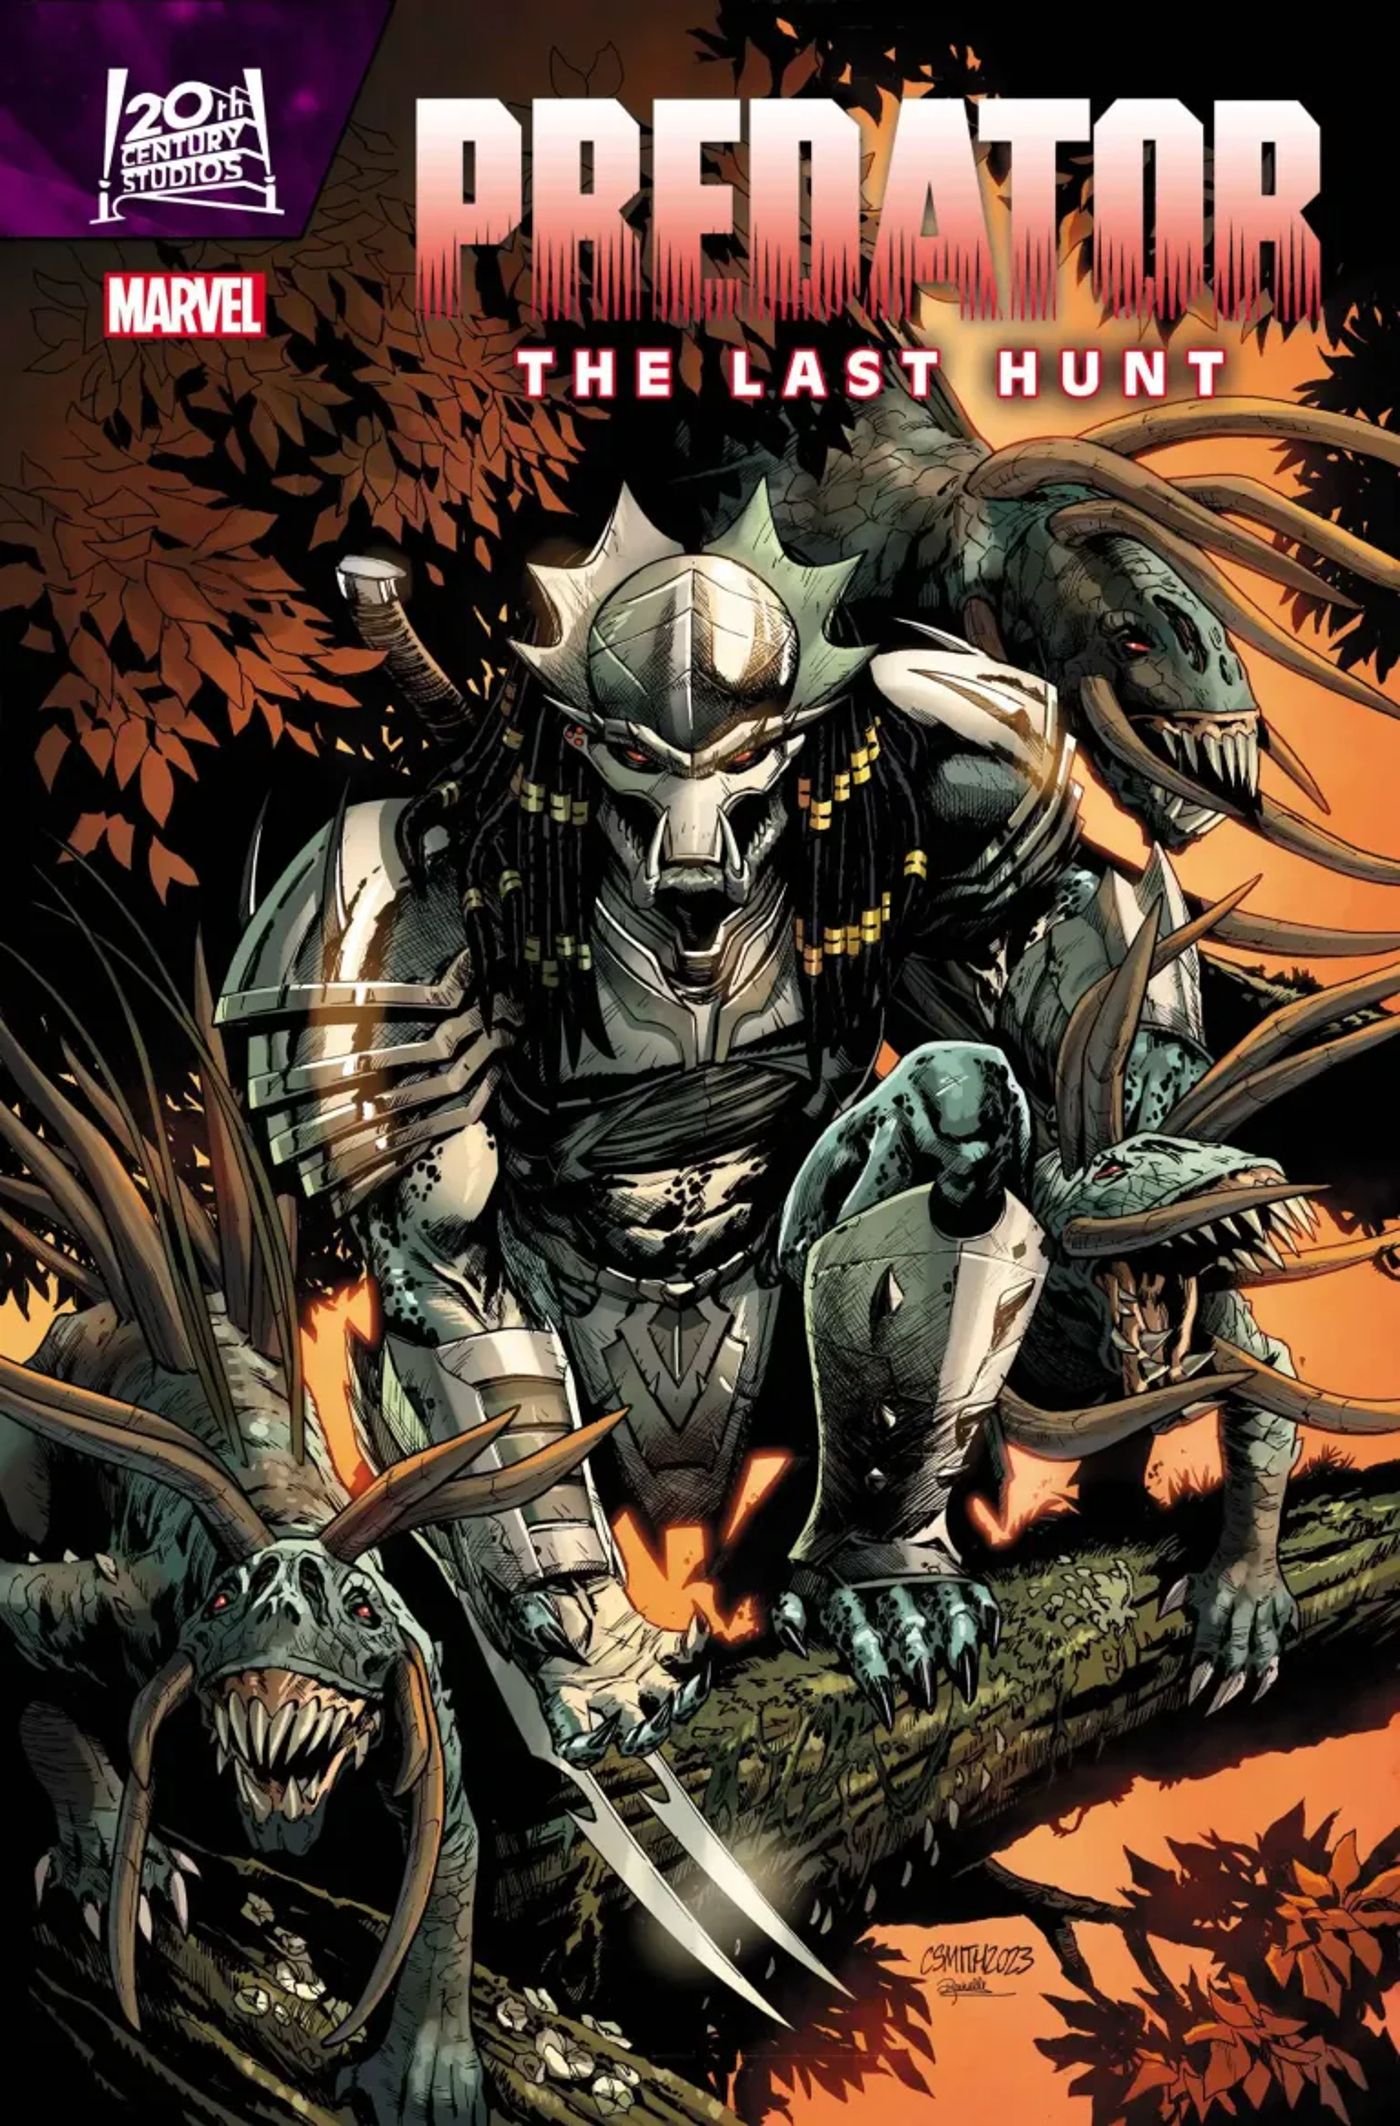 Cory Smith cover for Marvel's upcoming Predator: The Last Hunt miniseries